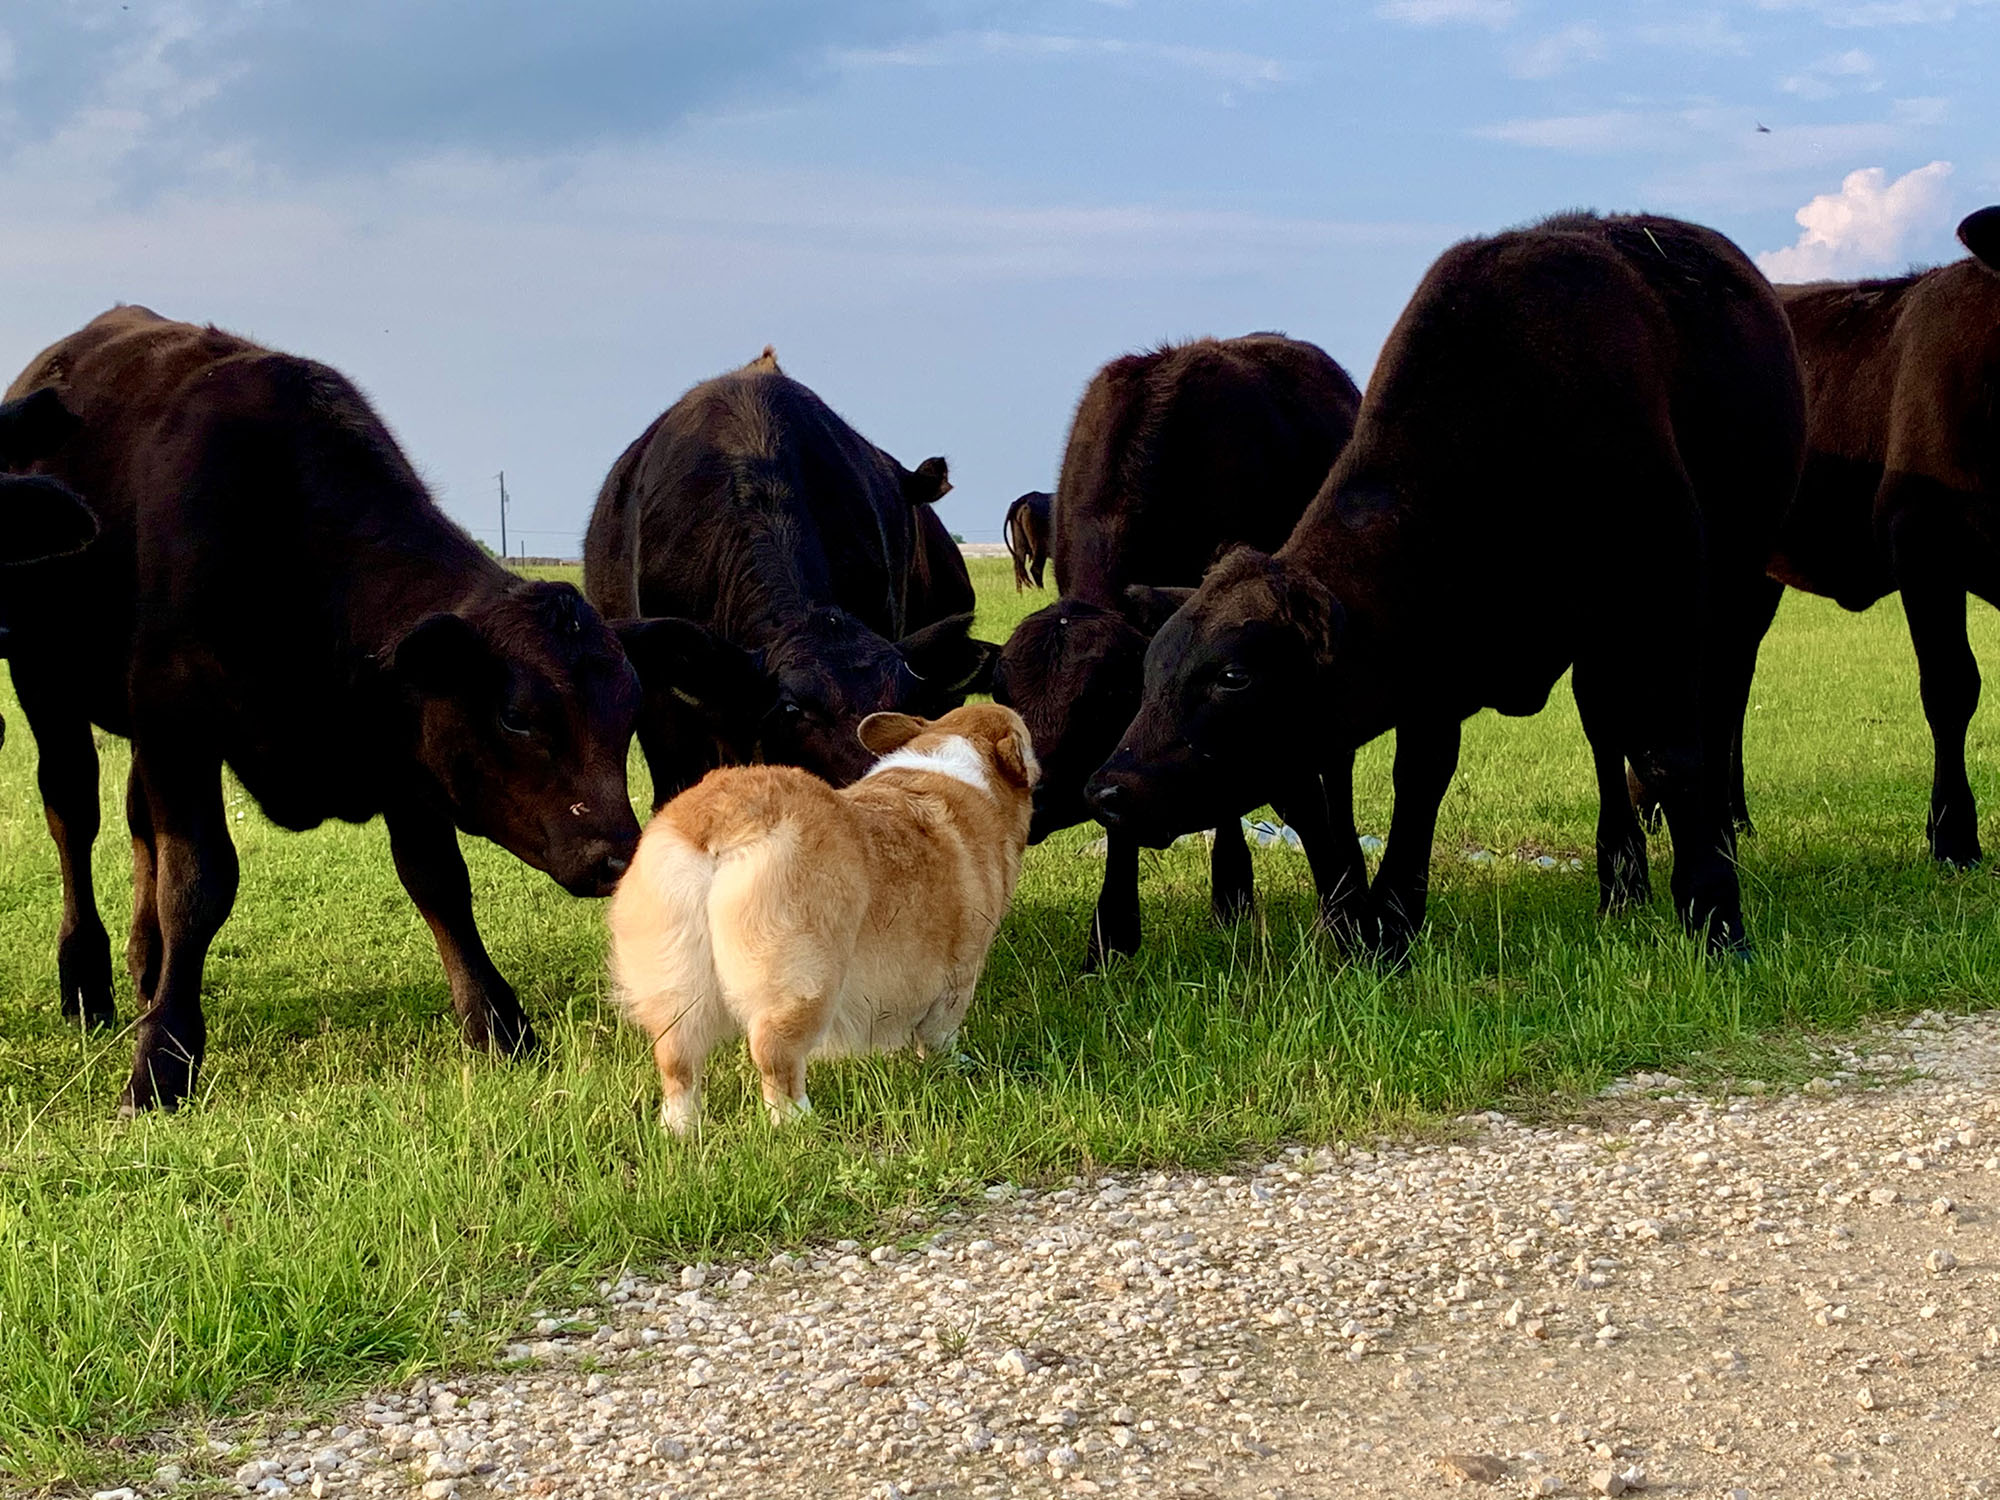 Molly Letter_Nov. 2021_Cows with dog.jpg